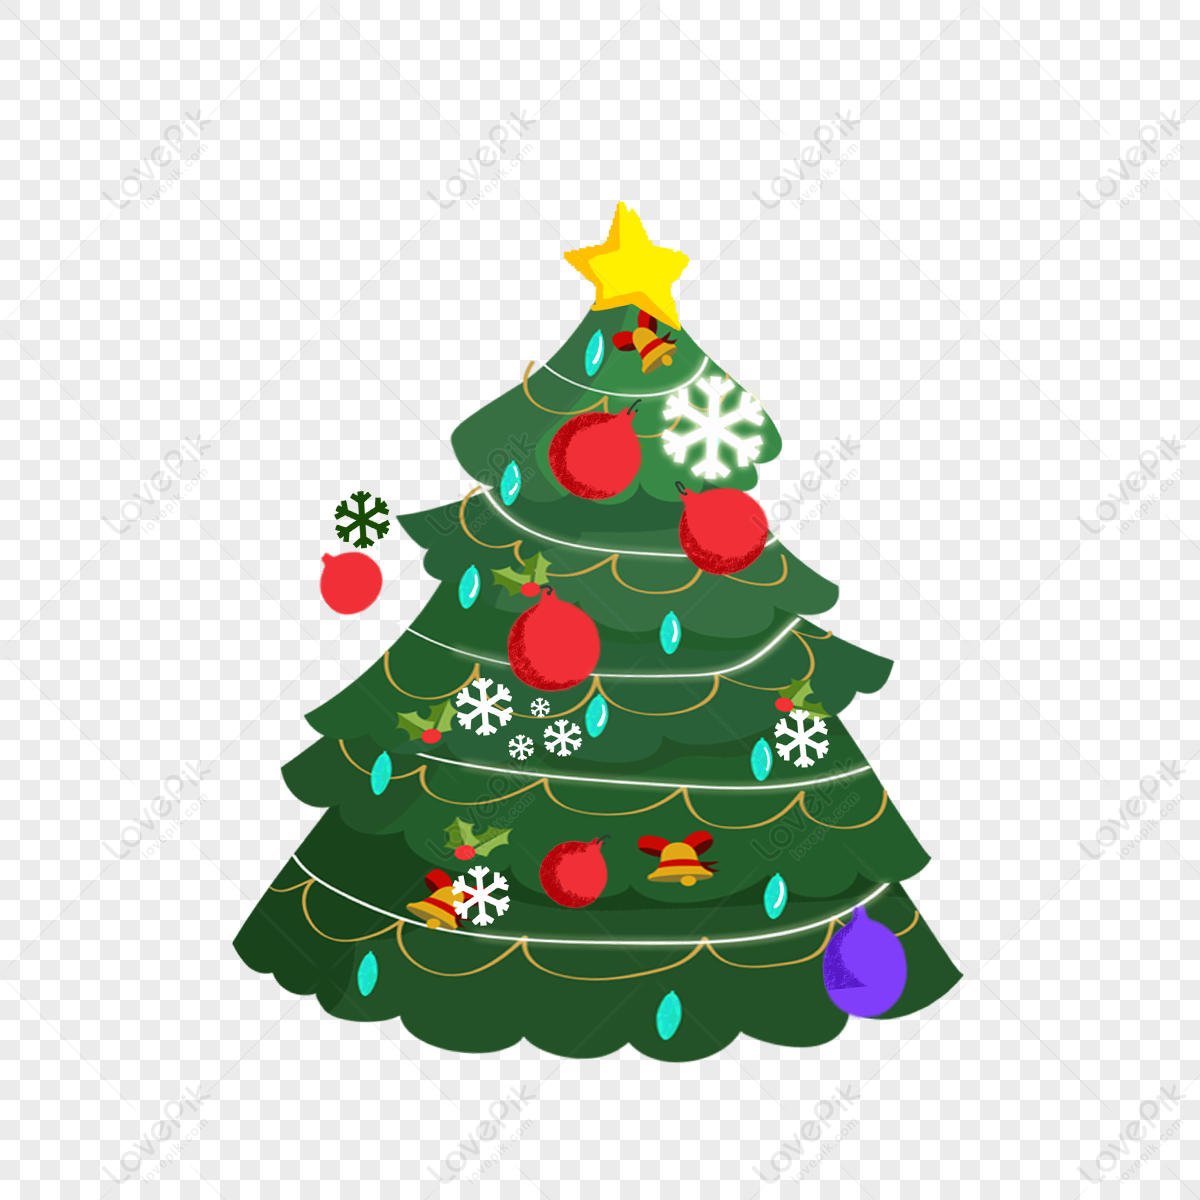 Christmas Tree PNG Free Download And Clipart Image For Free Download -  Lovepik | 400924073